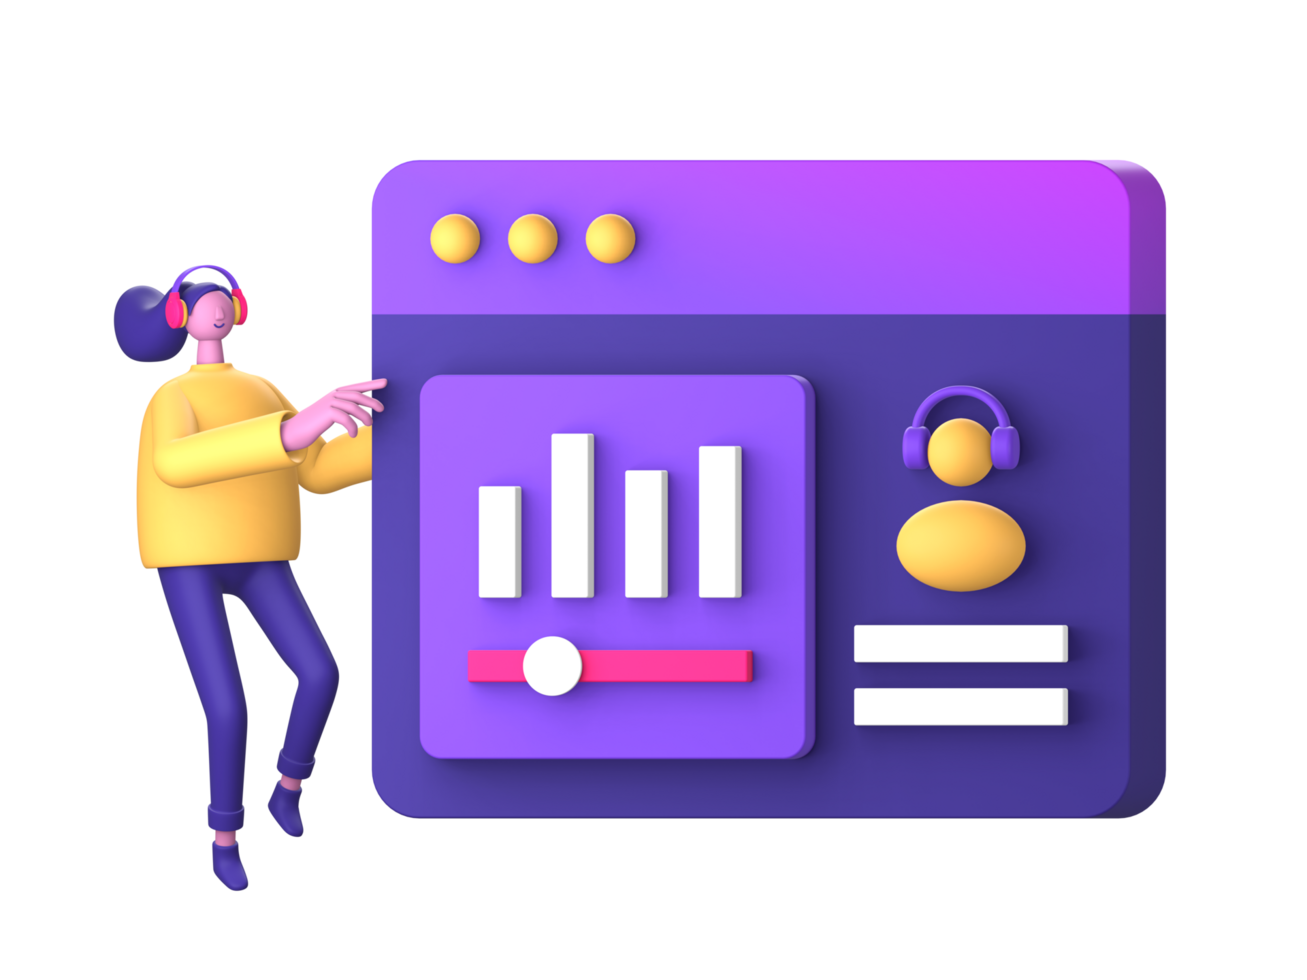 purple illustration icon of streaming and listening to music with 3D character for UI UX social media ads design png